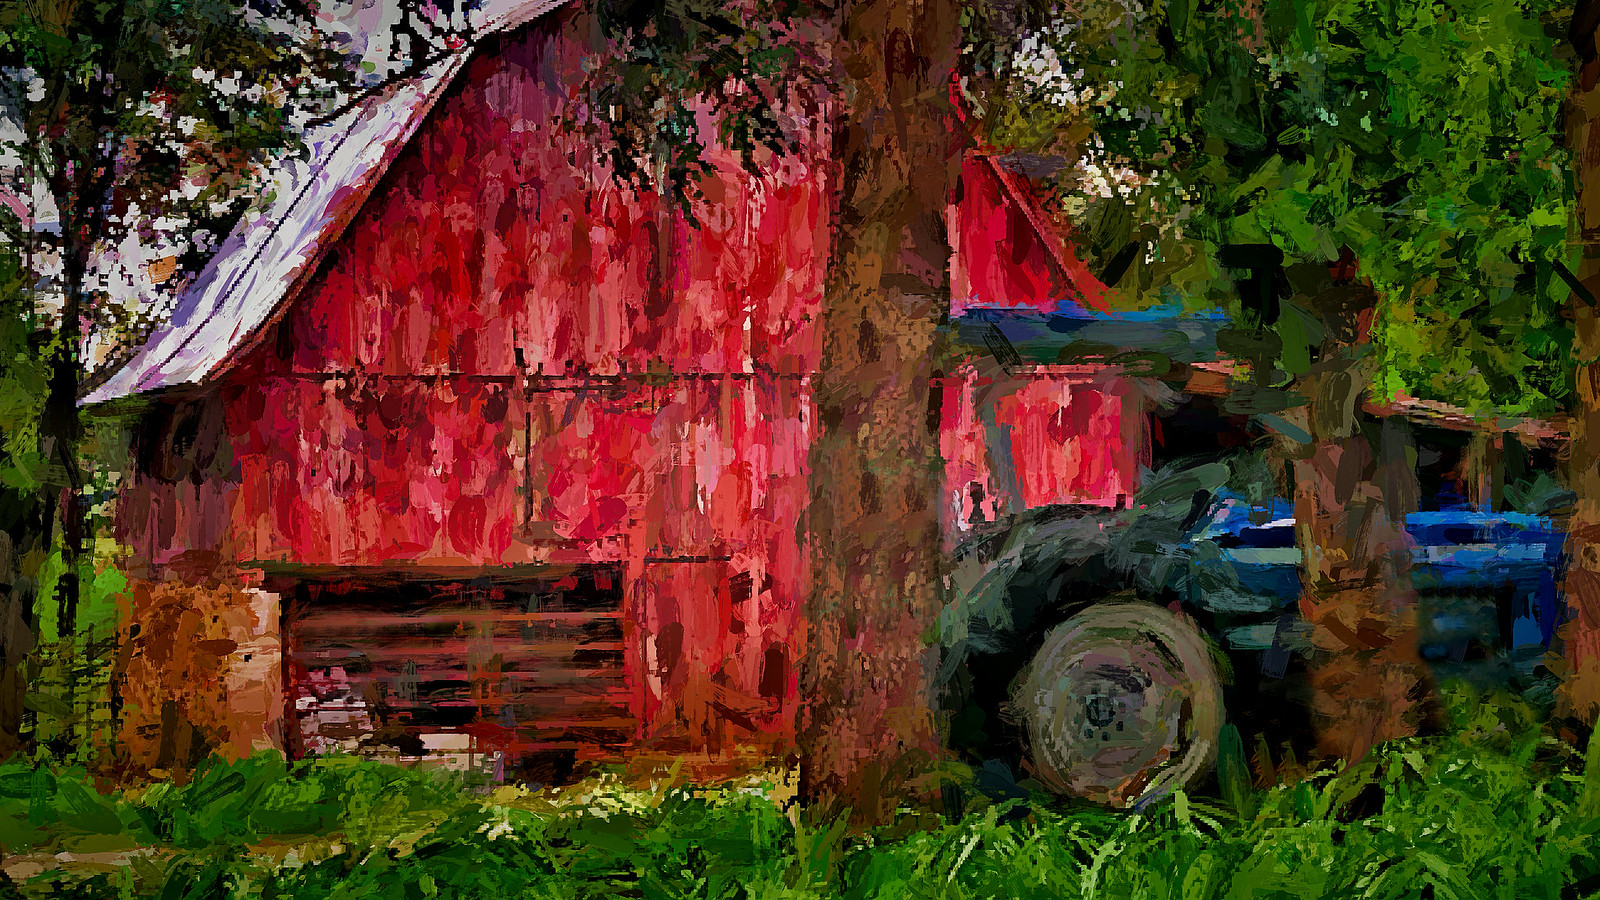 red barn, blue tractor